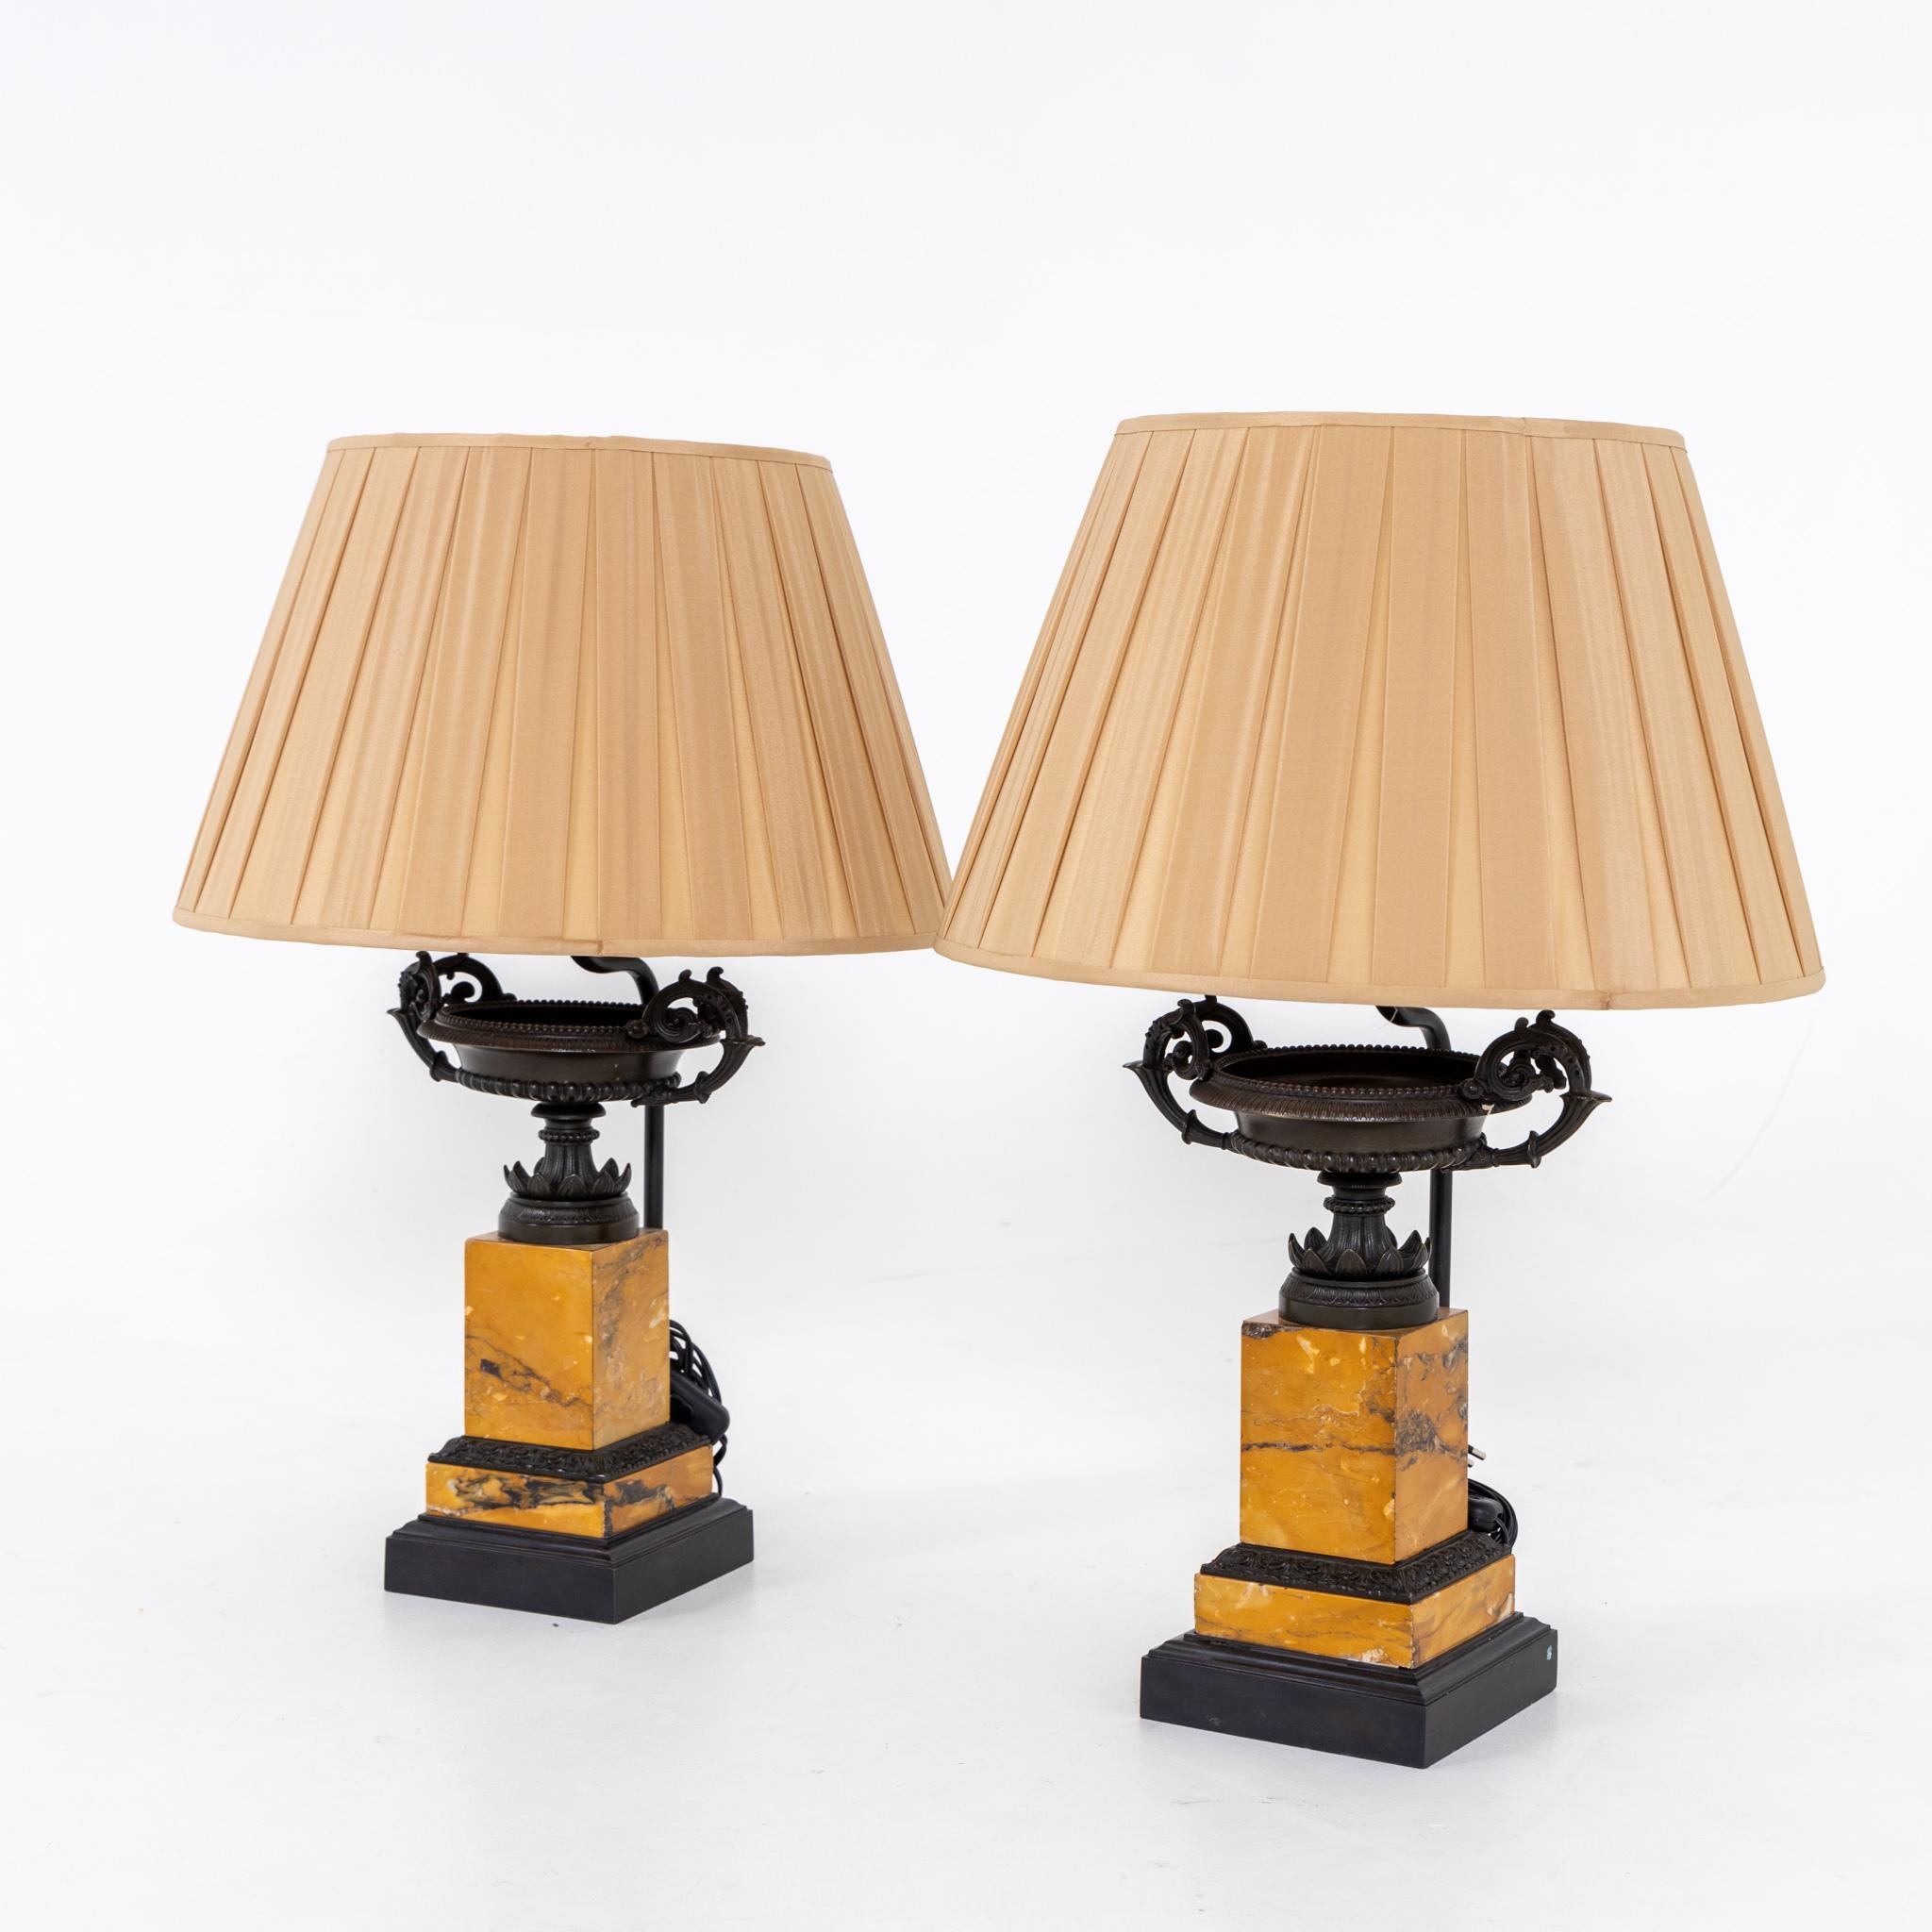 European Table Lamps with Tazza Decor, 19th Century